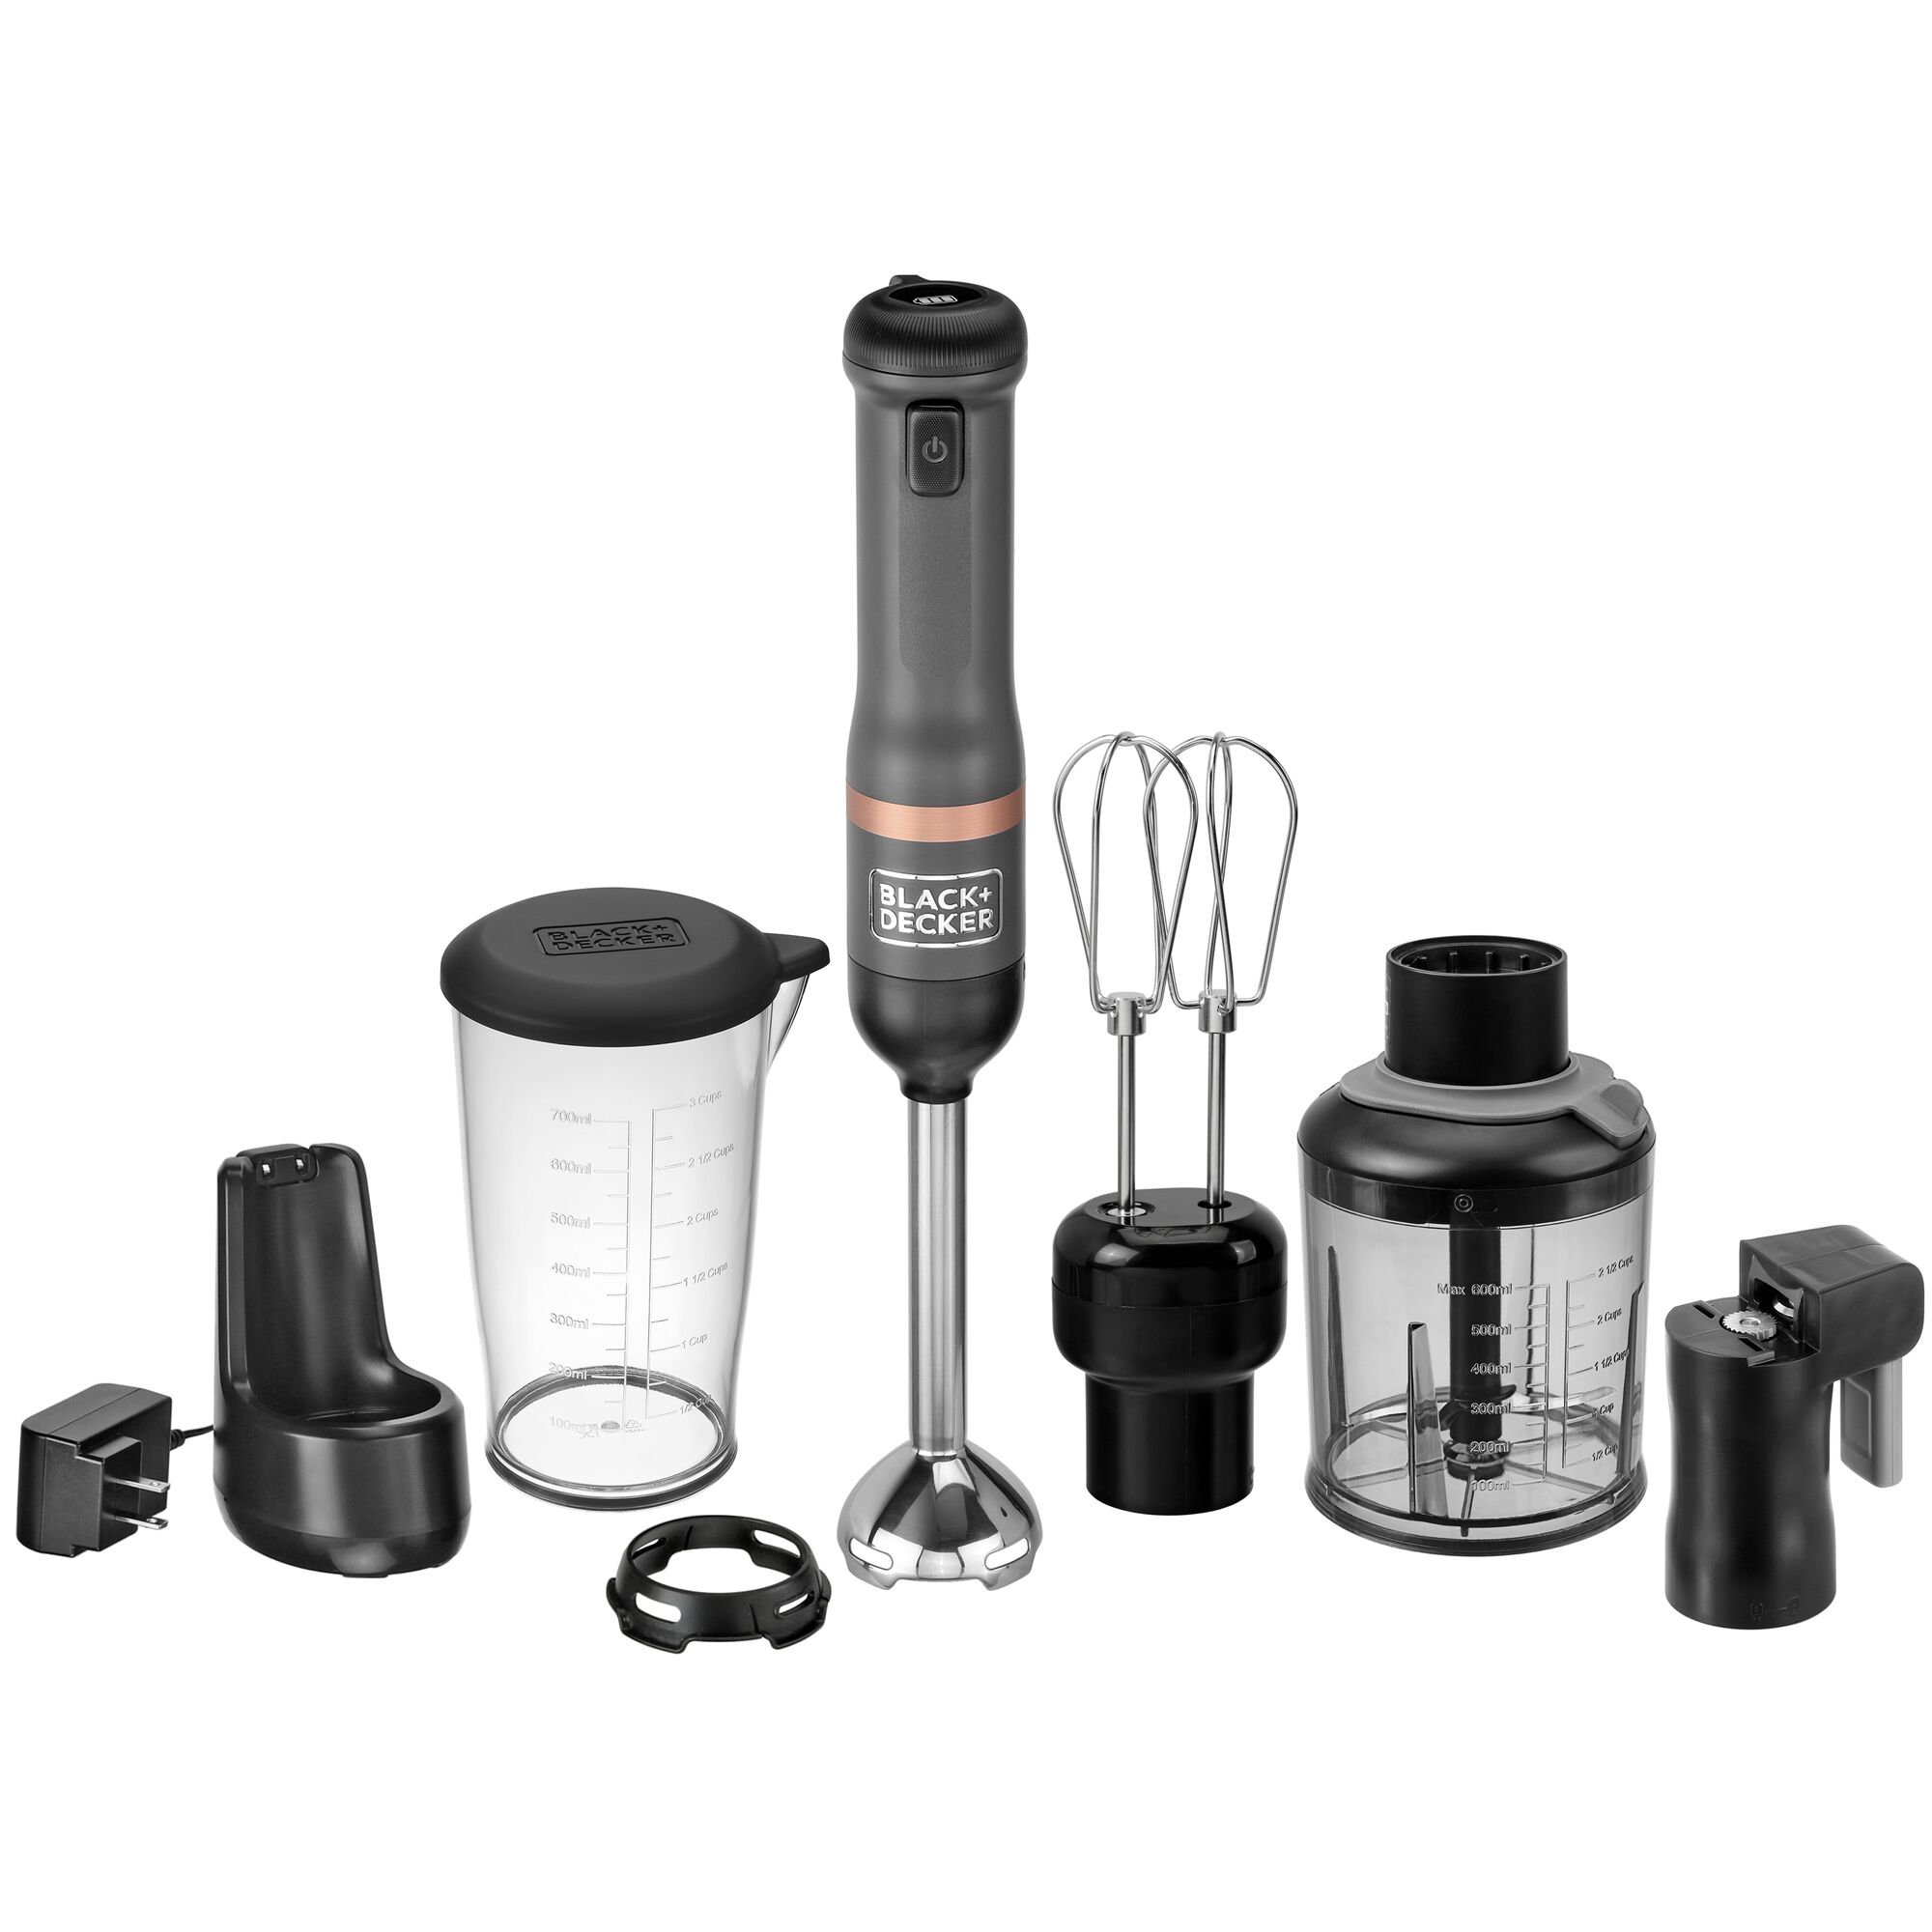 Front view of BLACK+DECKER kitchen wand 3in1 Cordless Kitchen multi-tool kit in grey featuring immersion blender, hand mixer, can opener and food chopper atachments